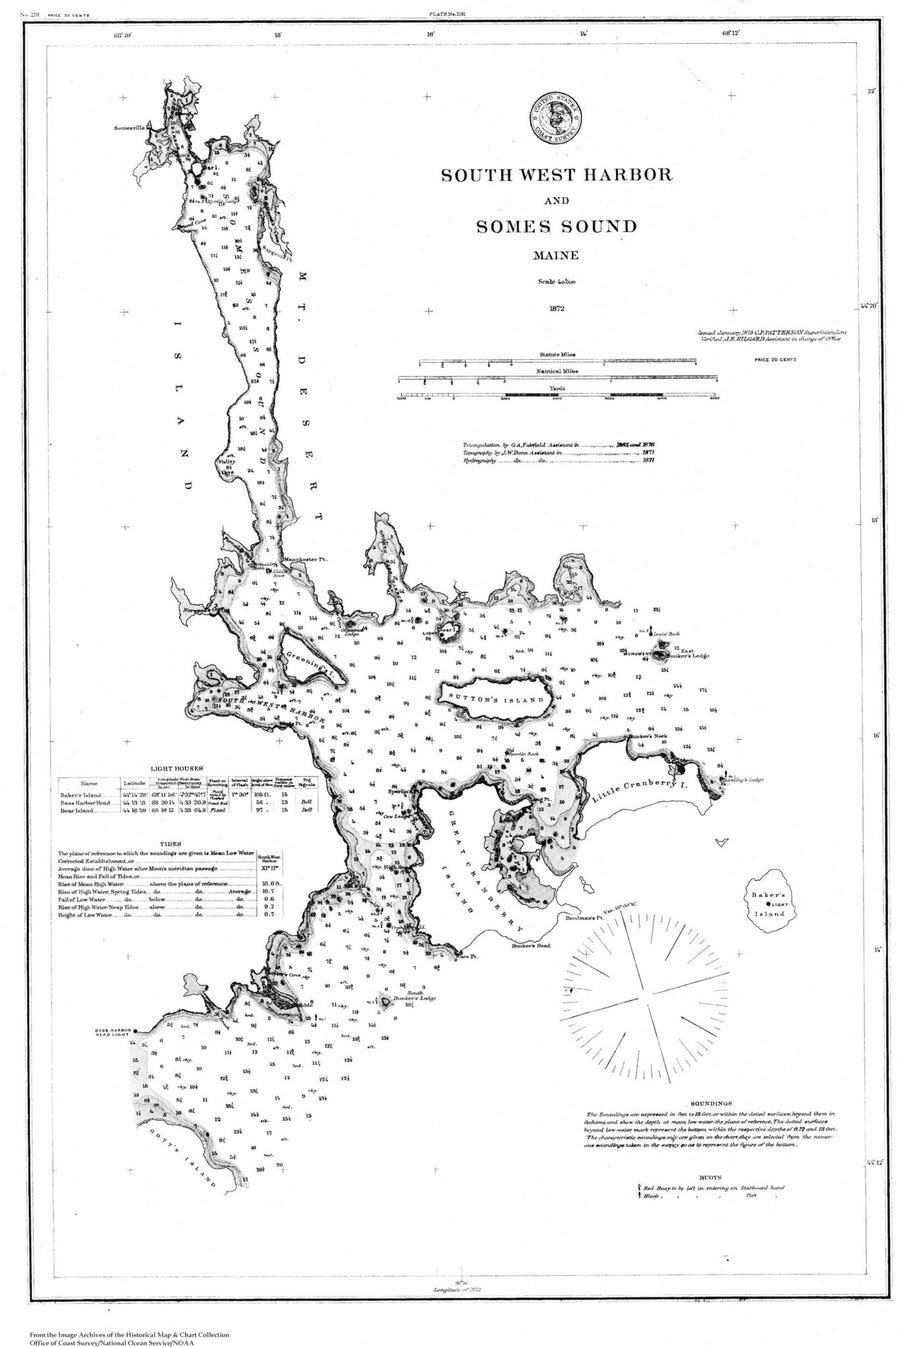 Southwest Harbor and Somes Sound Maine Map - 1872 (B&W)